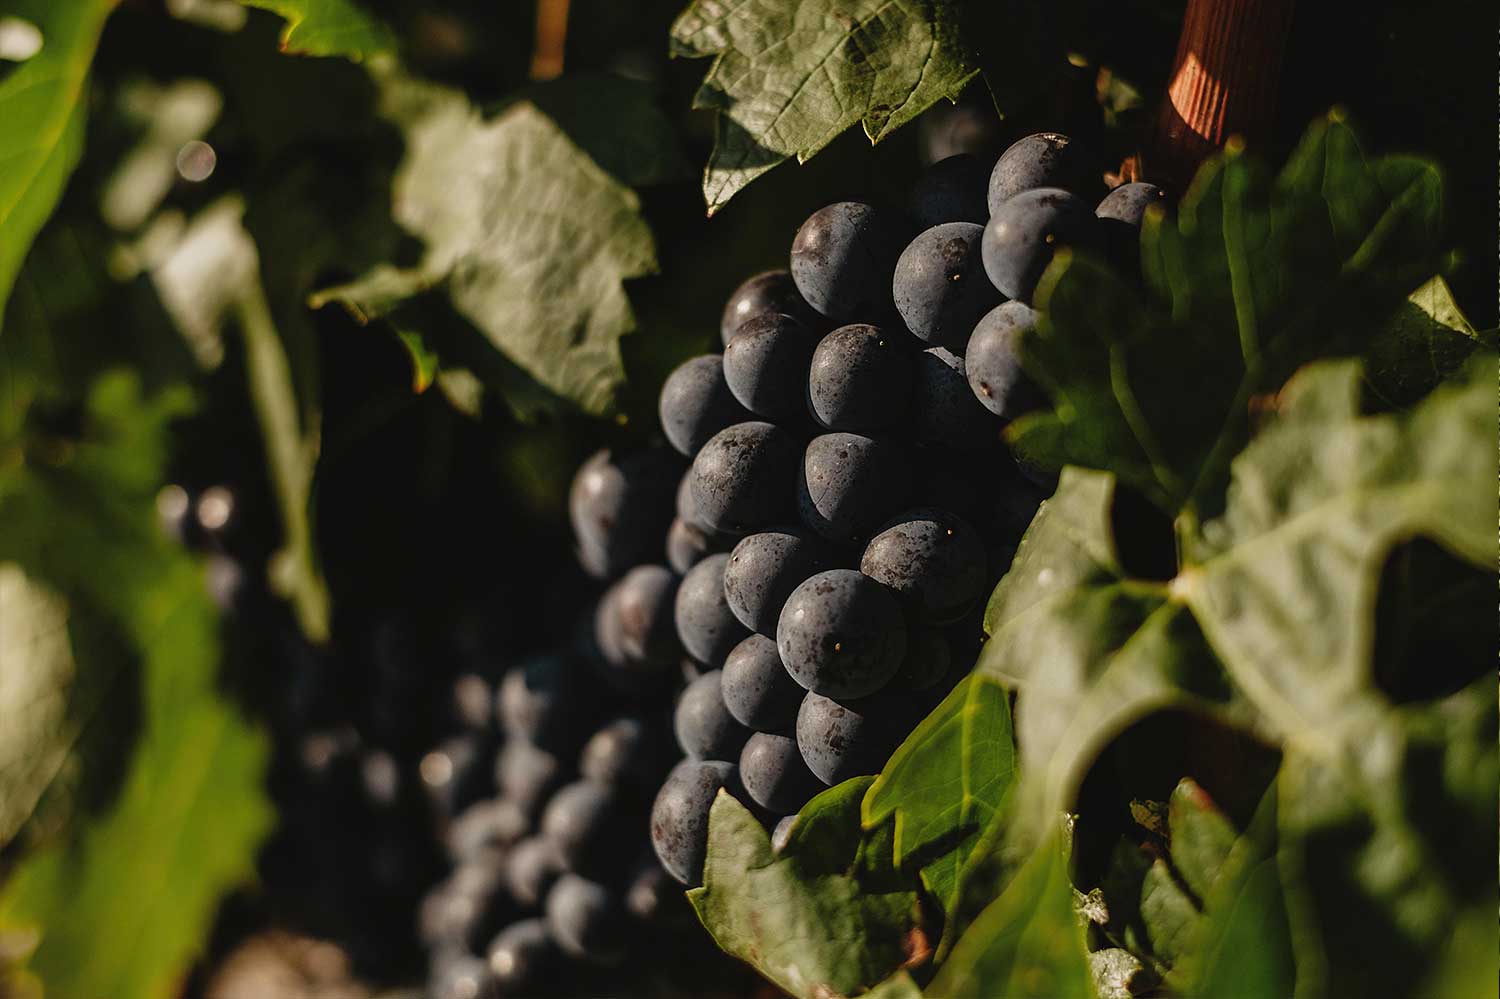 Rioja vines are our treasure - 7 different virieties of grapes 